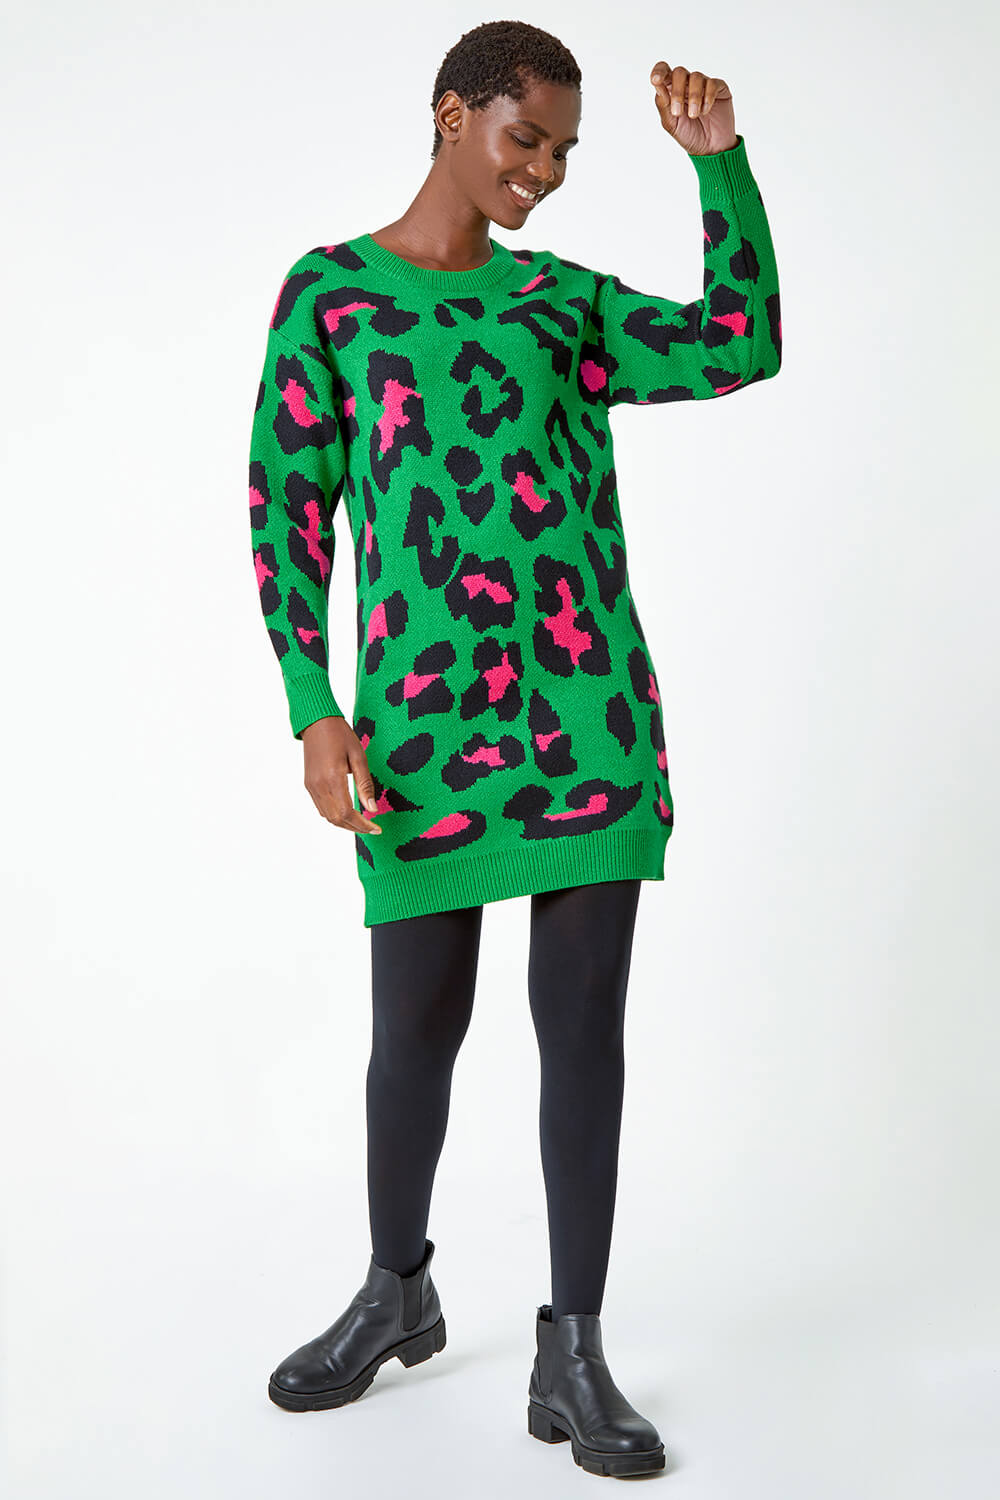 Green Leopard Print Knitted Jumper Dress, Image 2 of 5